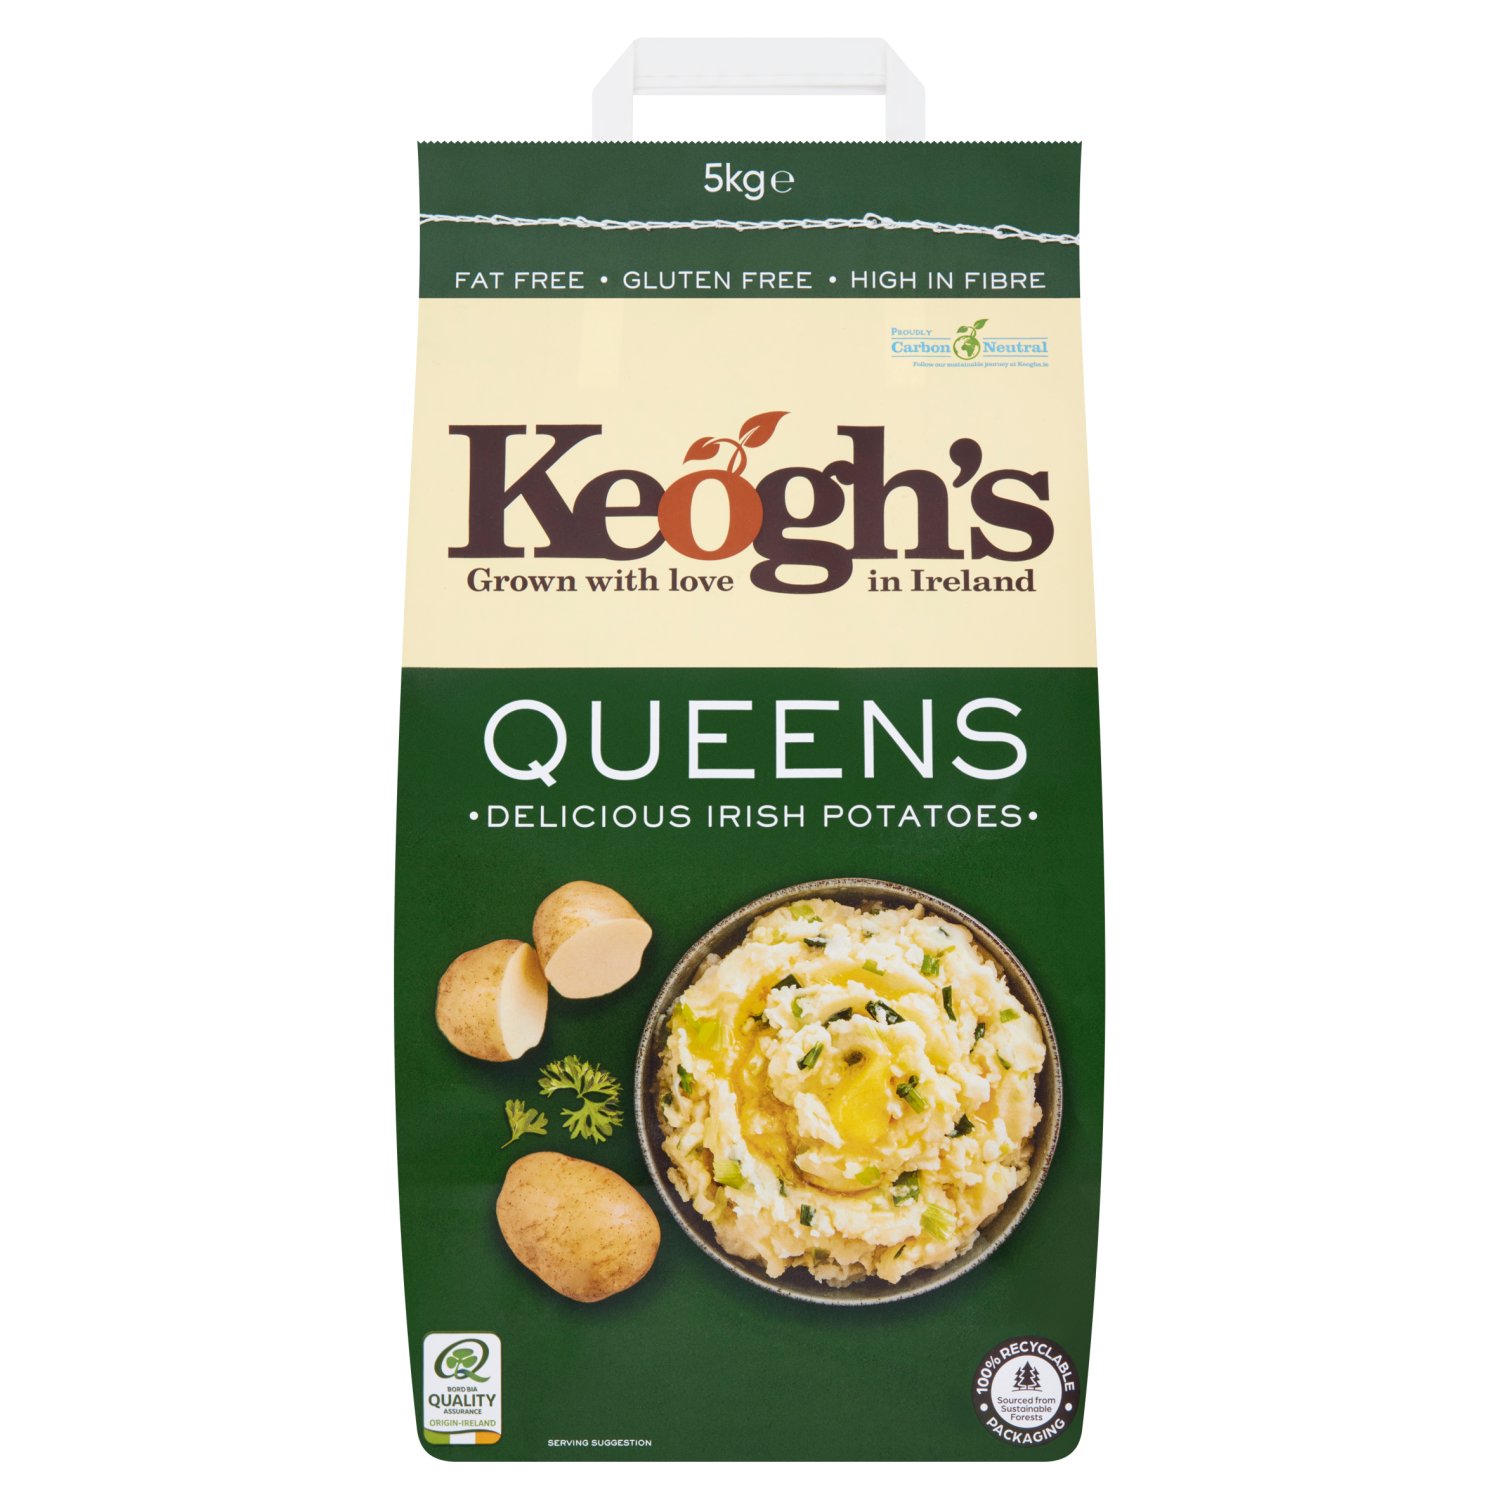 Keogh's Queen Potatoes Carry Pack (5 kg)